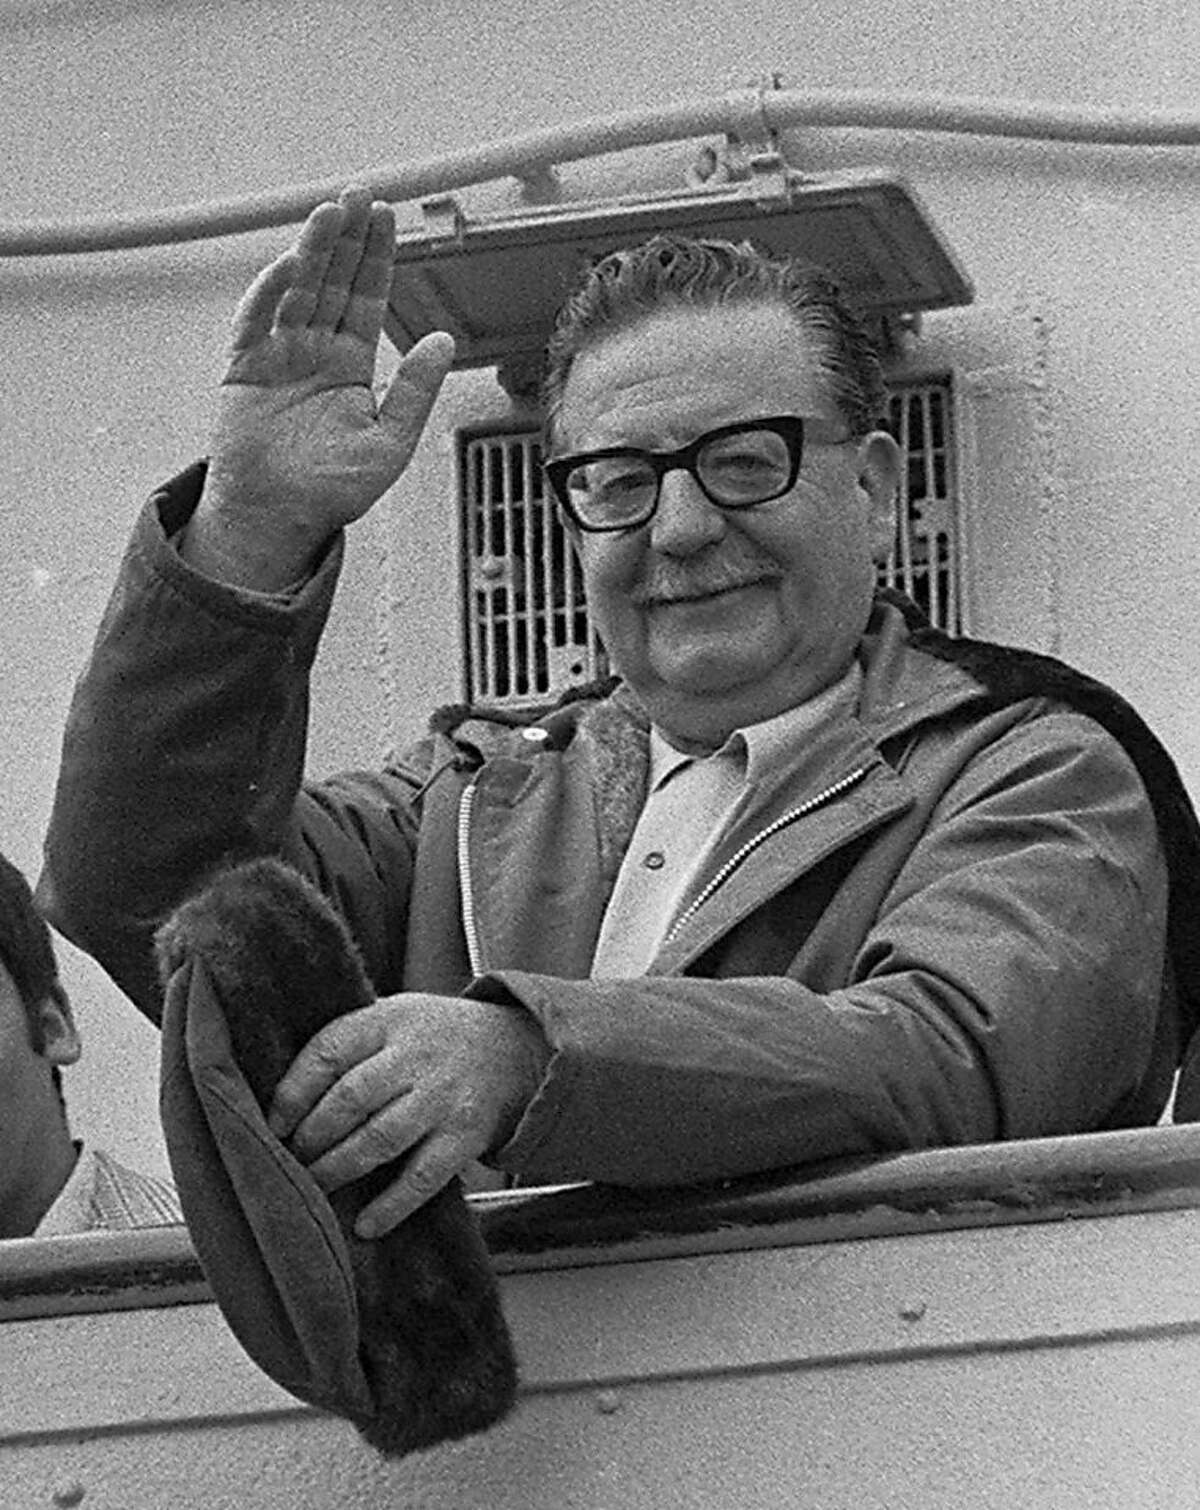 FILE - In this 1971 file photo, President Salvador Allende waves to supporters in Chile. President Sebastian Pinera is being pressured by the daughters of two presidents whose deaths remain shrouded in mystery: Salvador Allende, who allegedly committed suicide as Pinochet's troops seized the presidential palace in 1973, and Allende's predecessor Eduardo Frei Montalva, who had become a prominent Pinochet critic and was allegedly poisoned in 1982.